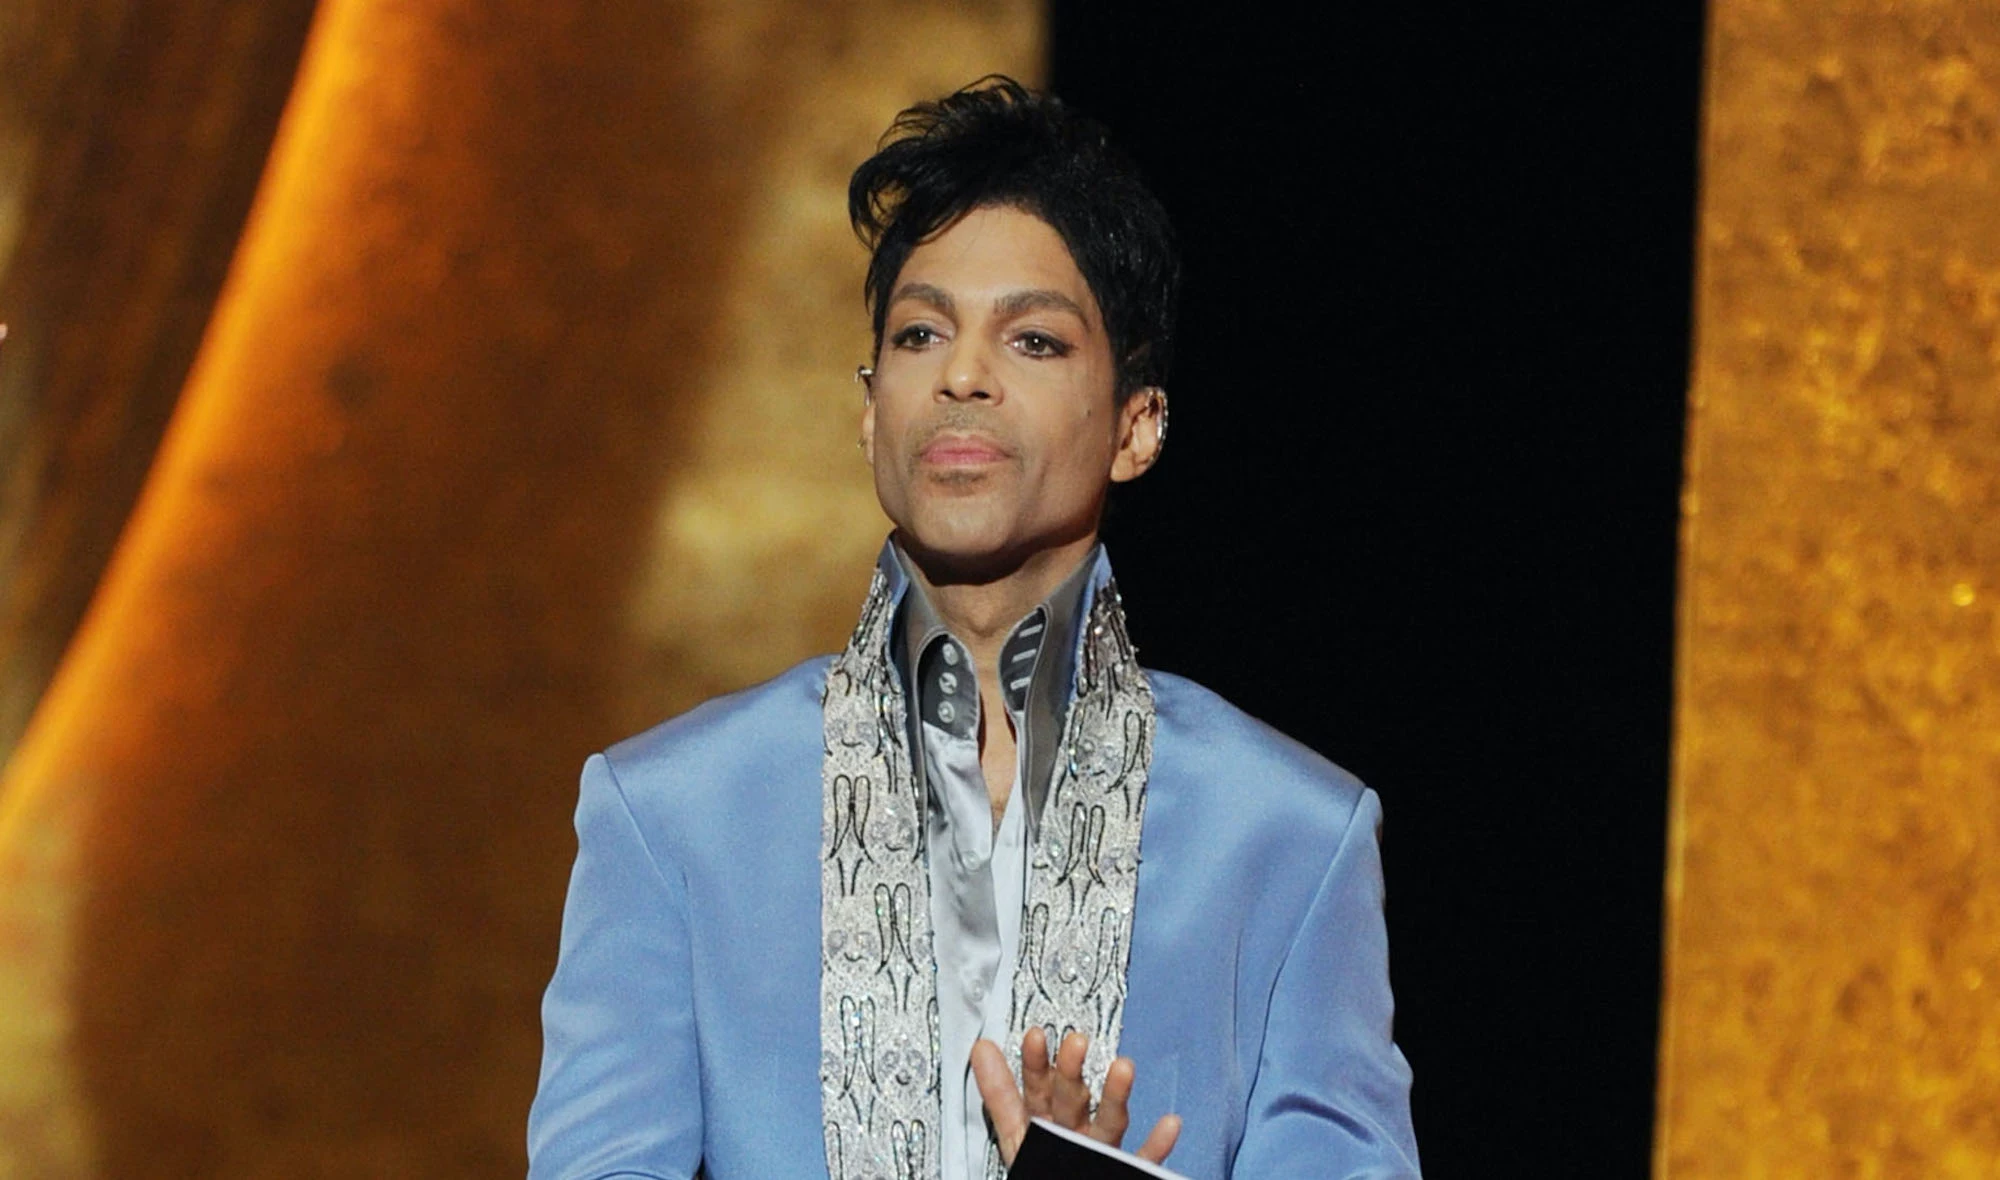 https://townsquare.media/site/812/files/2020/05/andre-3000-facts-prince.jpg